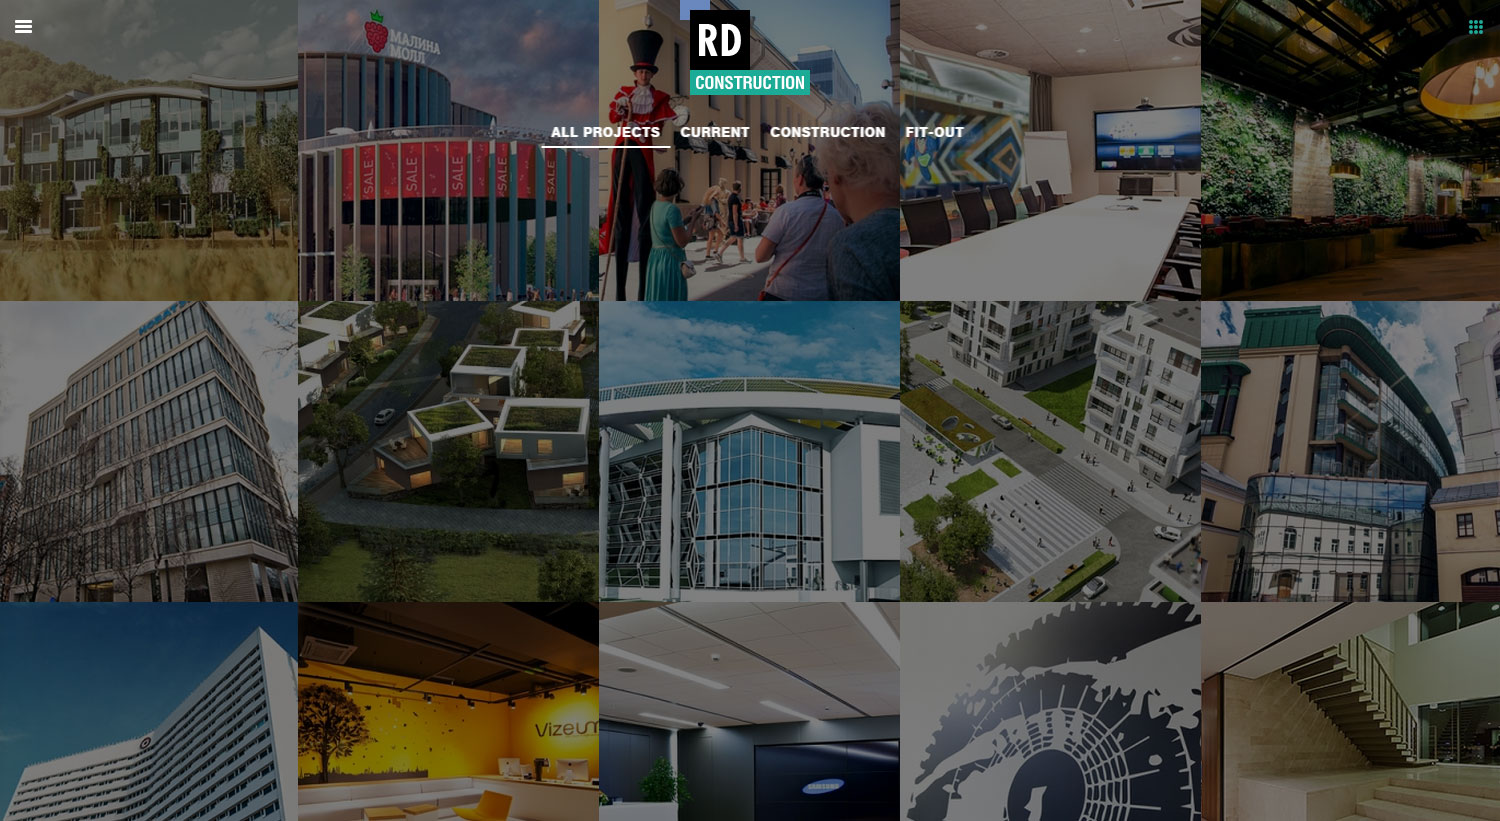 RD Construction - Website of the Day